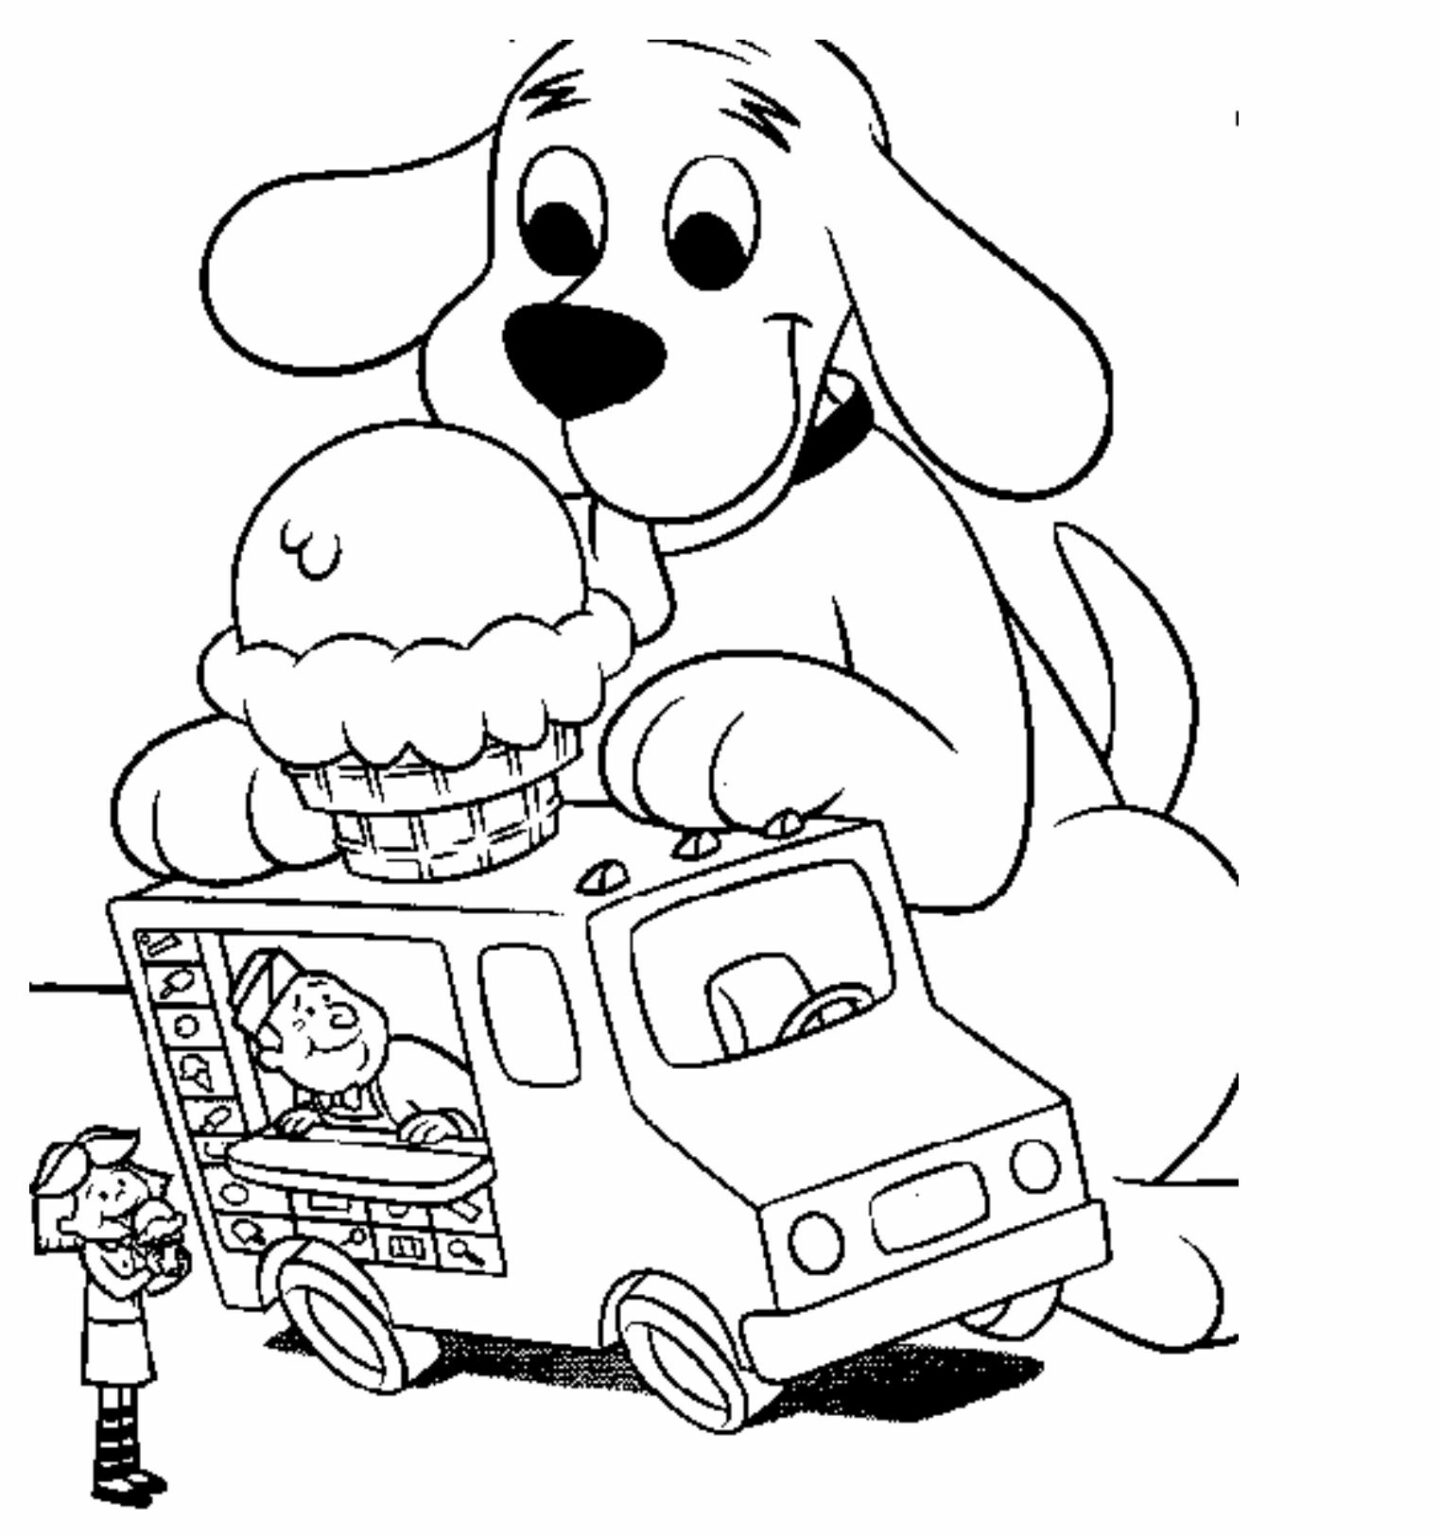 Let's Have Fun With Clifford Coloring Pages Pdf - Coloringfolder.com